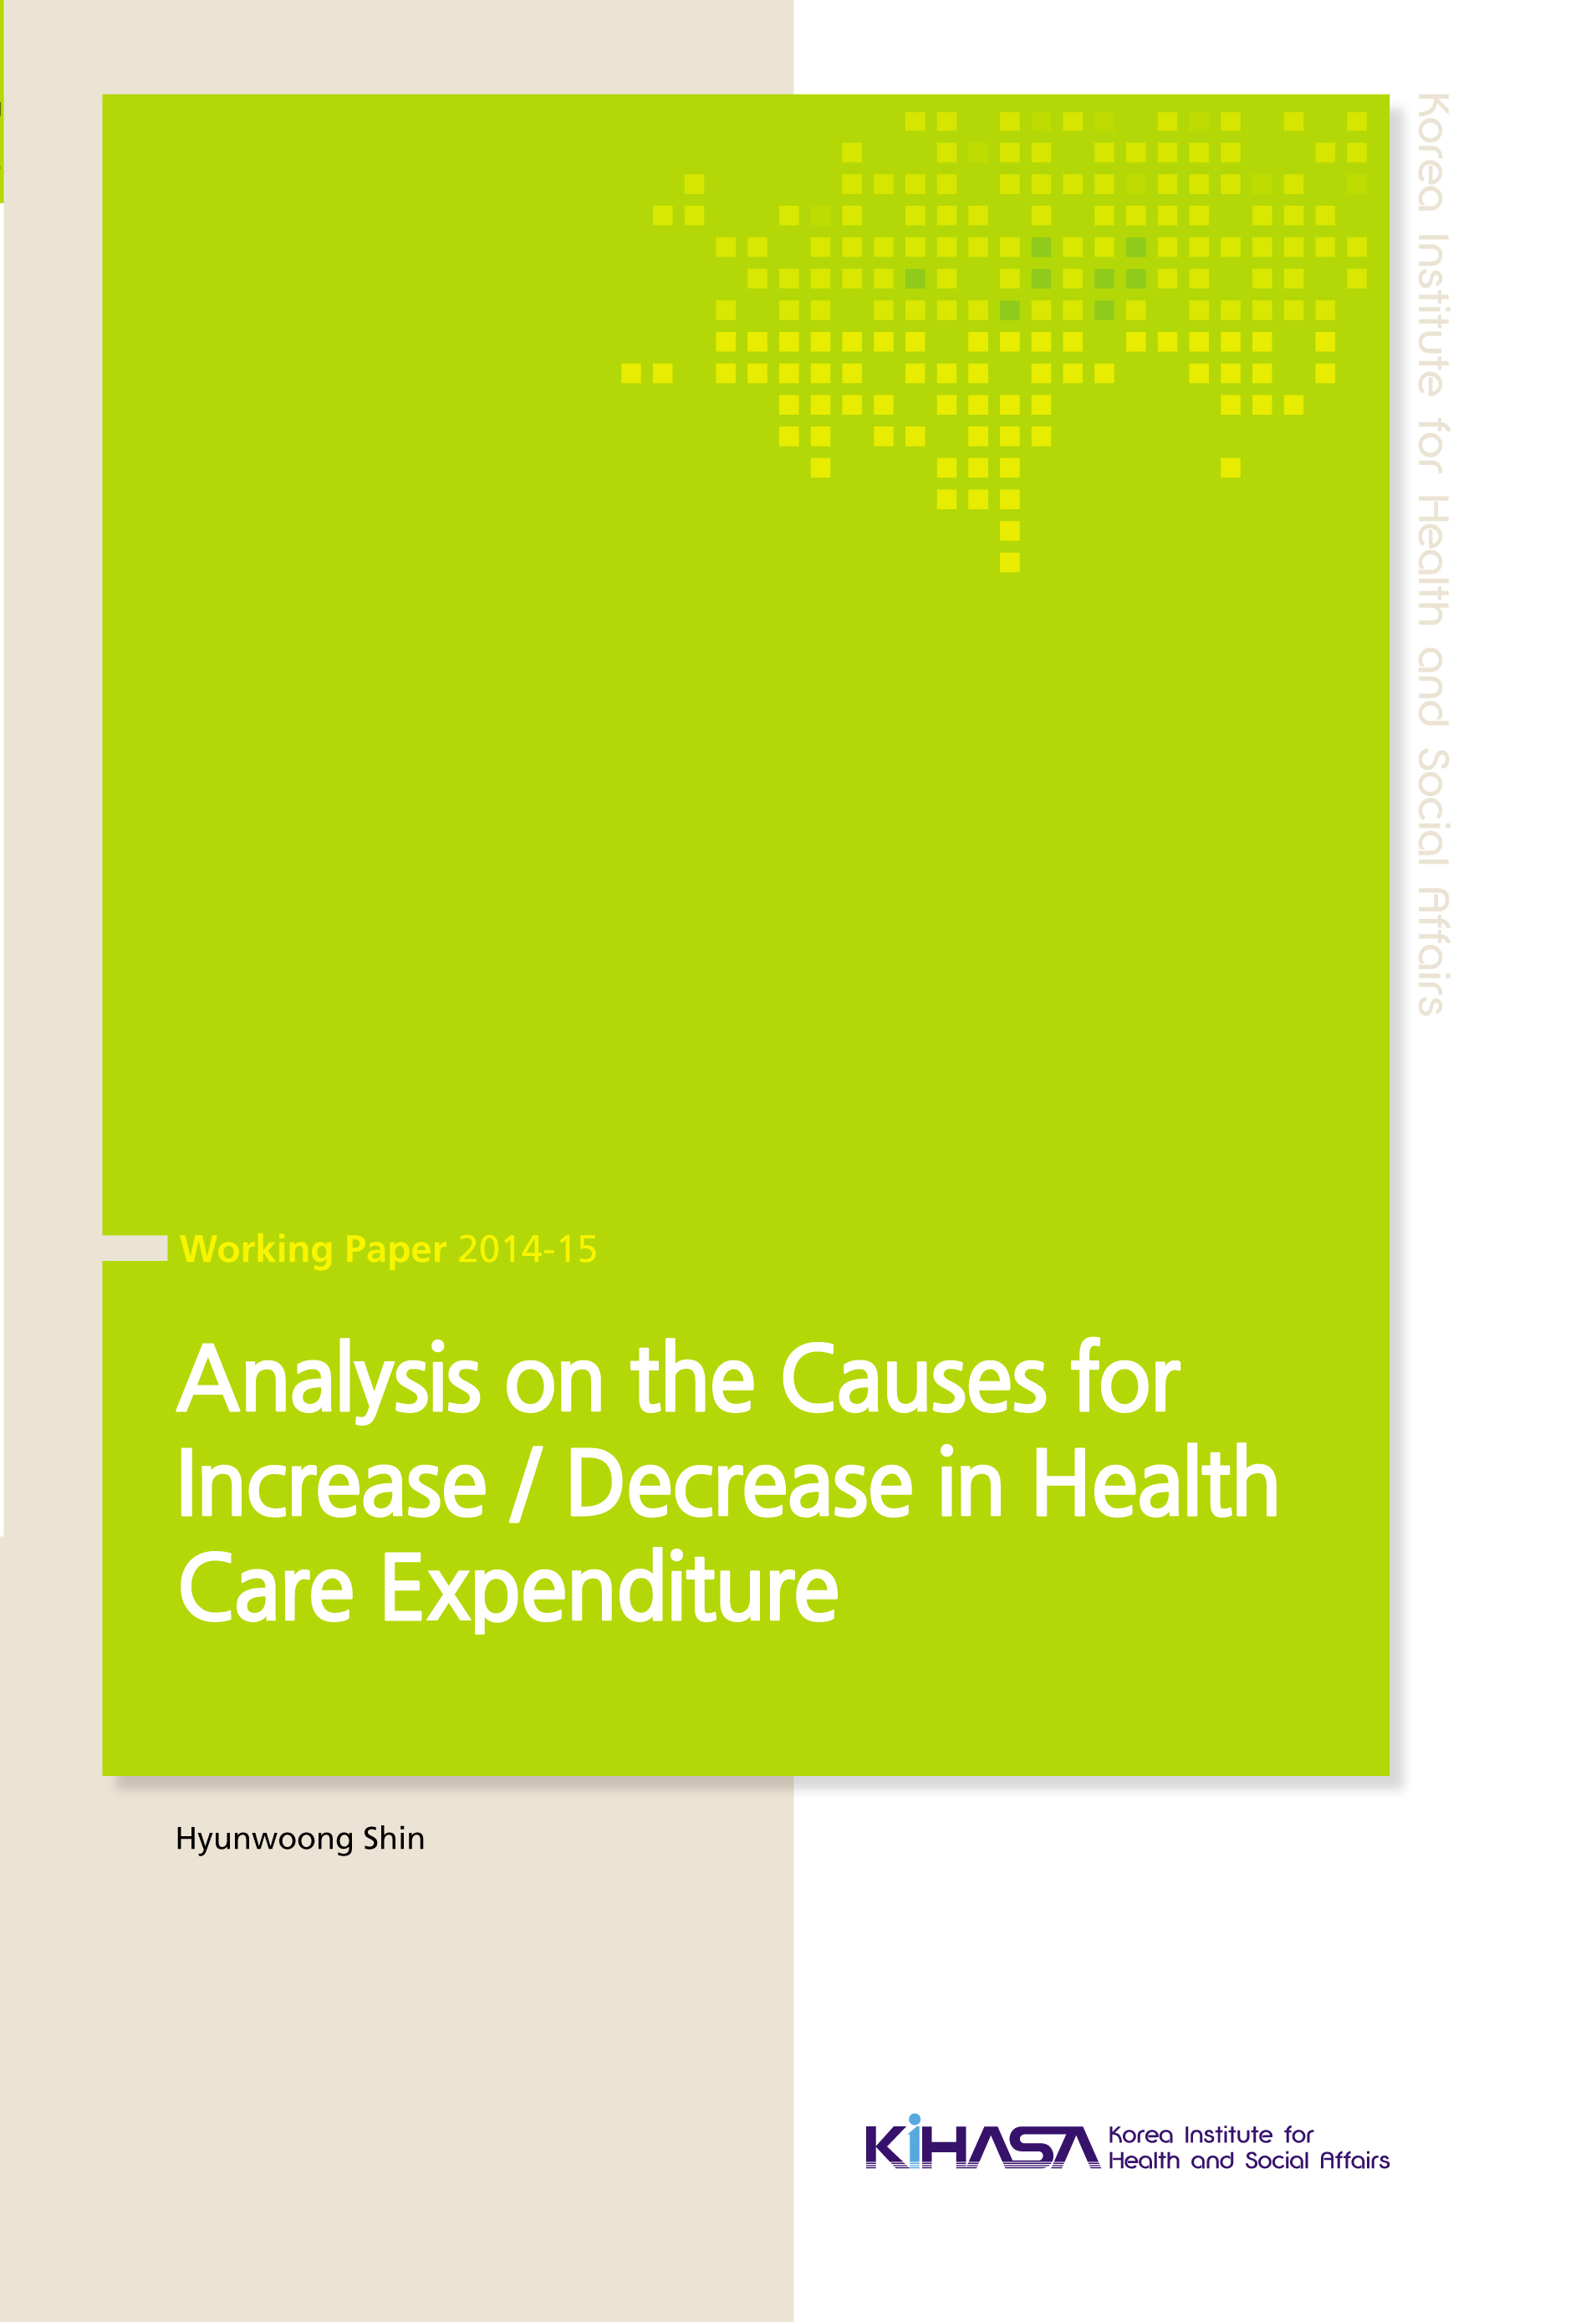 Analysis on the Causes for Increase/Decrease in Health Care Expenditure